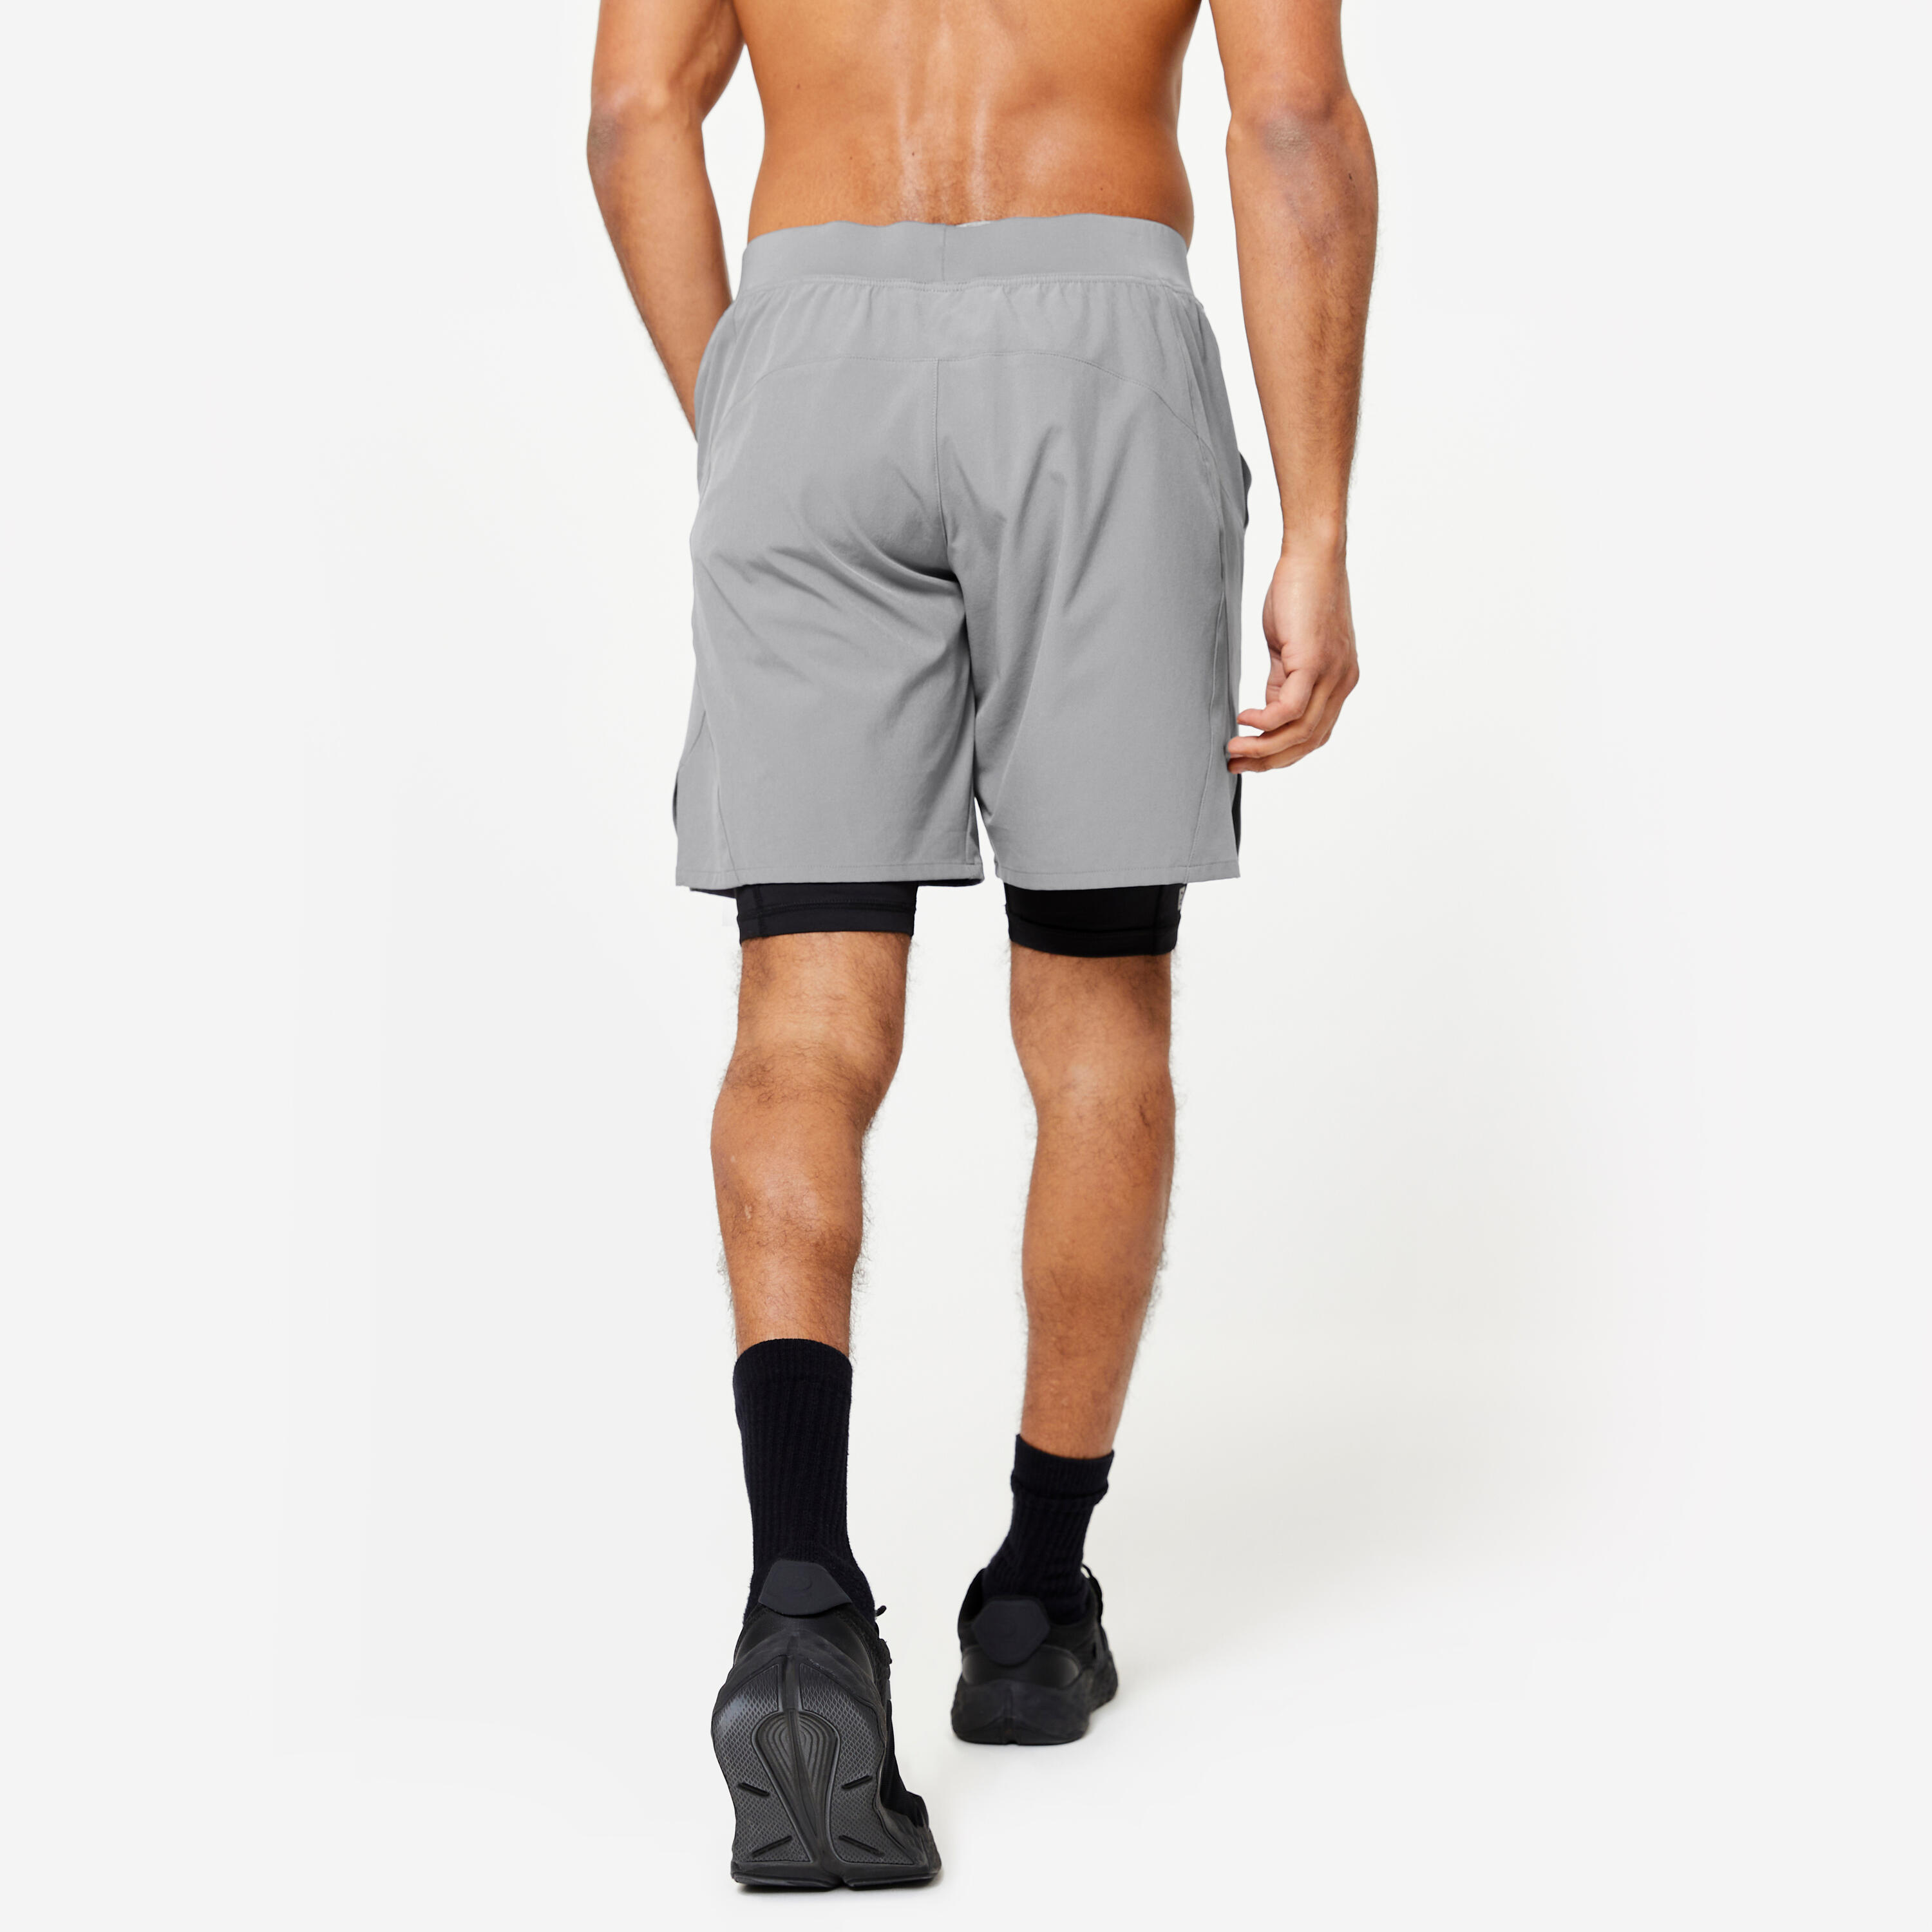 Breathable 2-in-1 Fitness Shorts with Zip Pocket - Grey 4/10